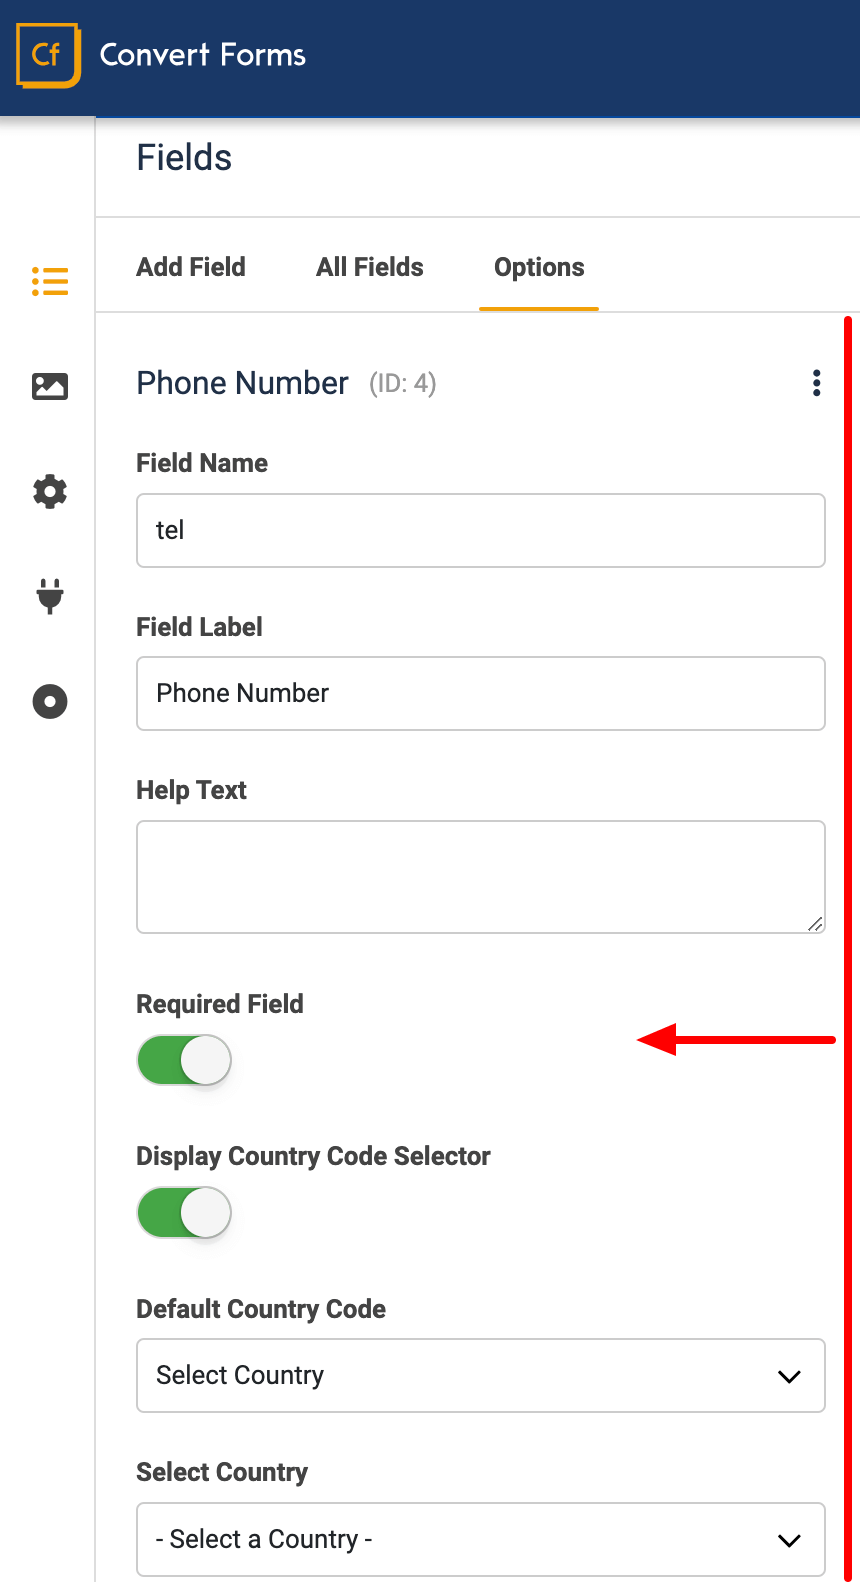 Configure the Phone Number field